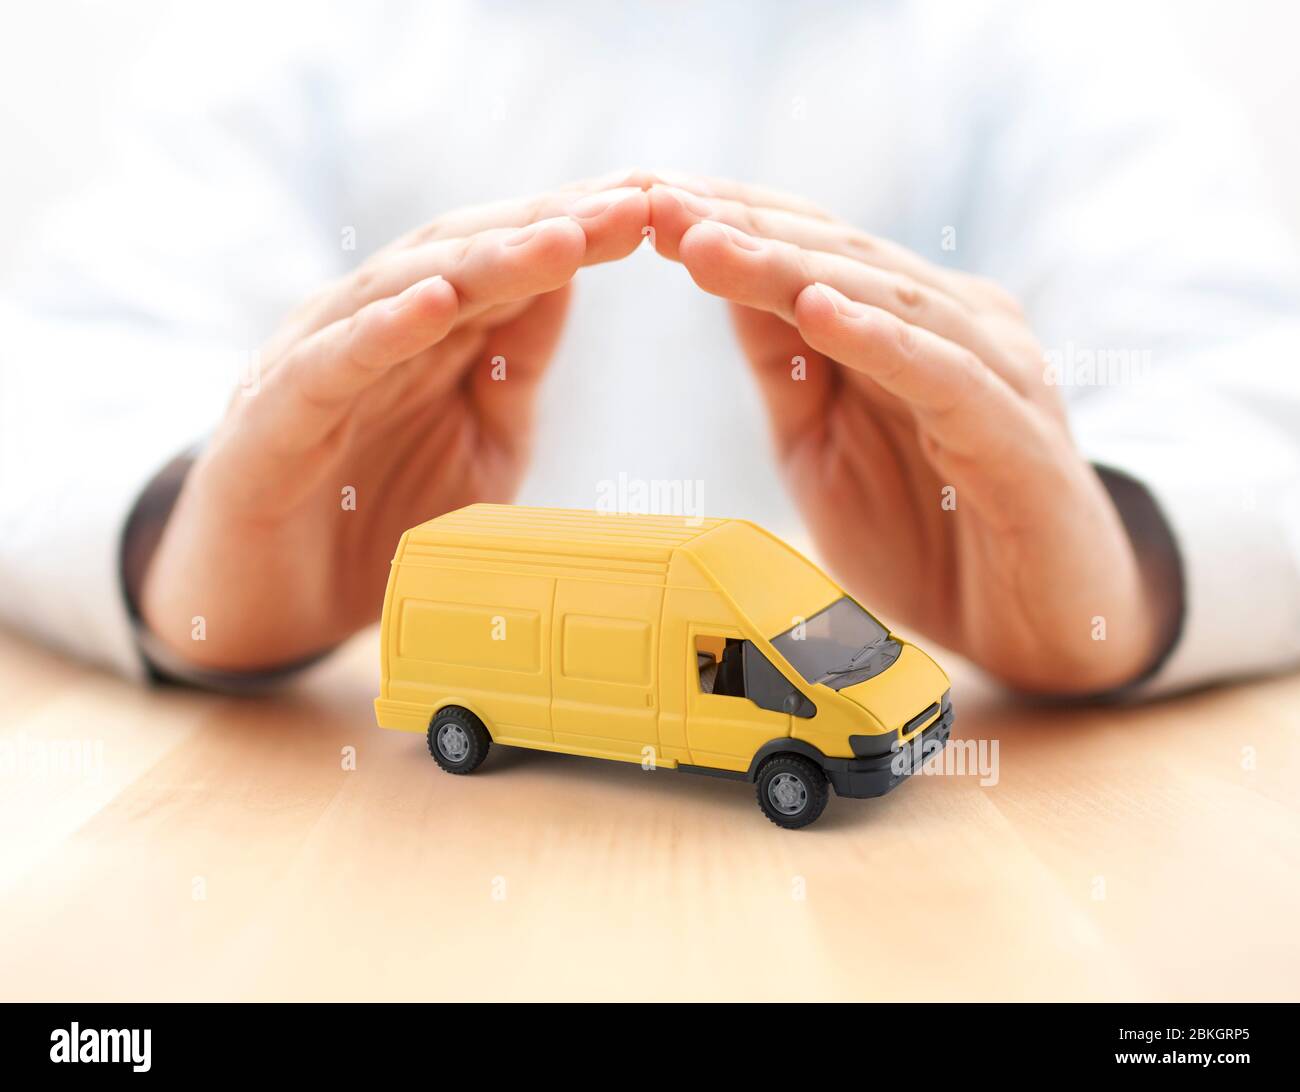 Transport yellow van car protected by hands Stock Photo